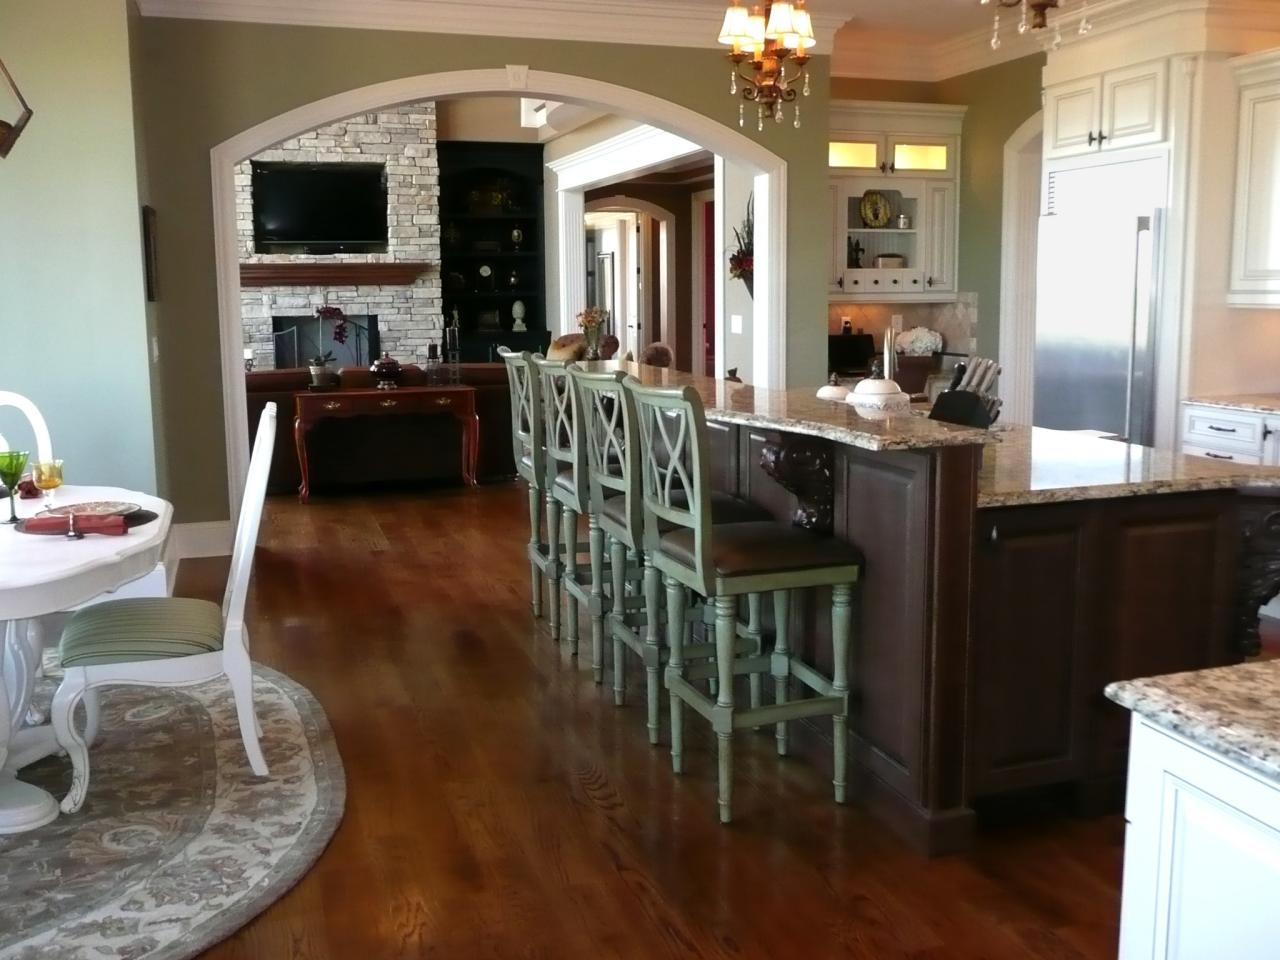 Kitchen Islands With Stools Pictures Ideas From Hgtv Hgtv